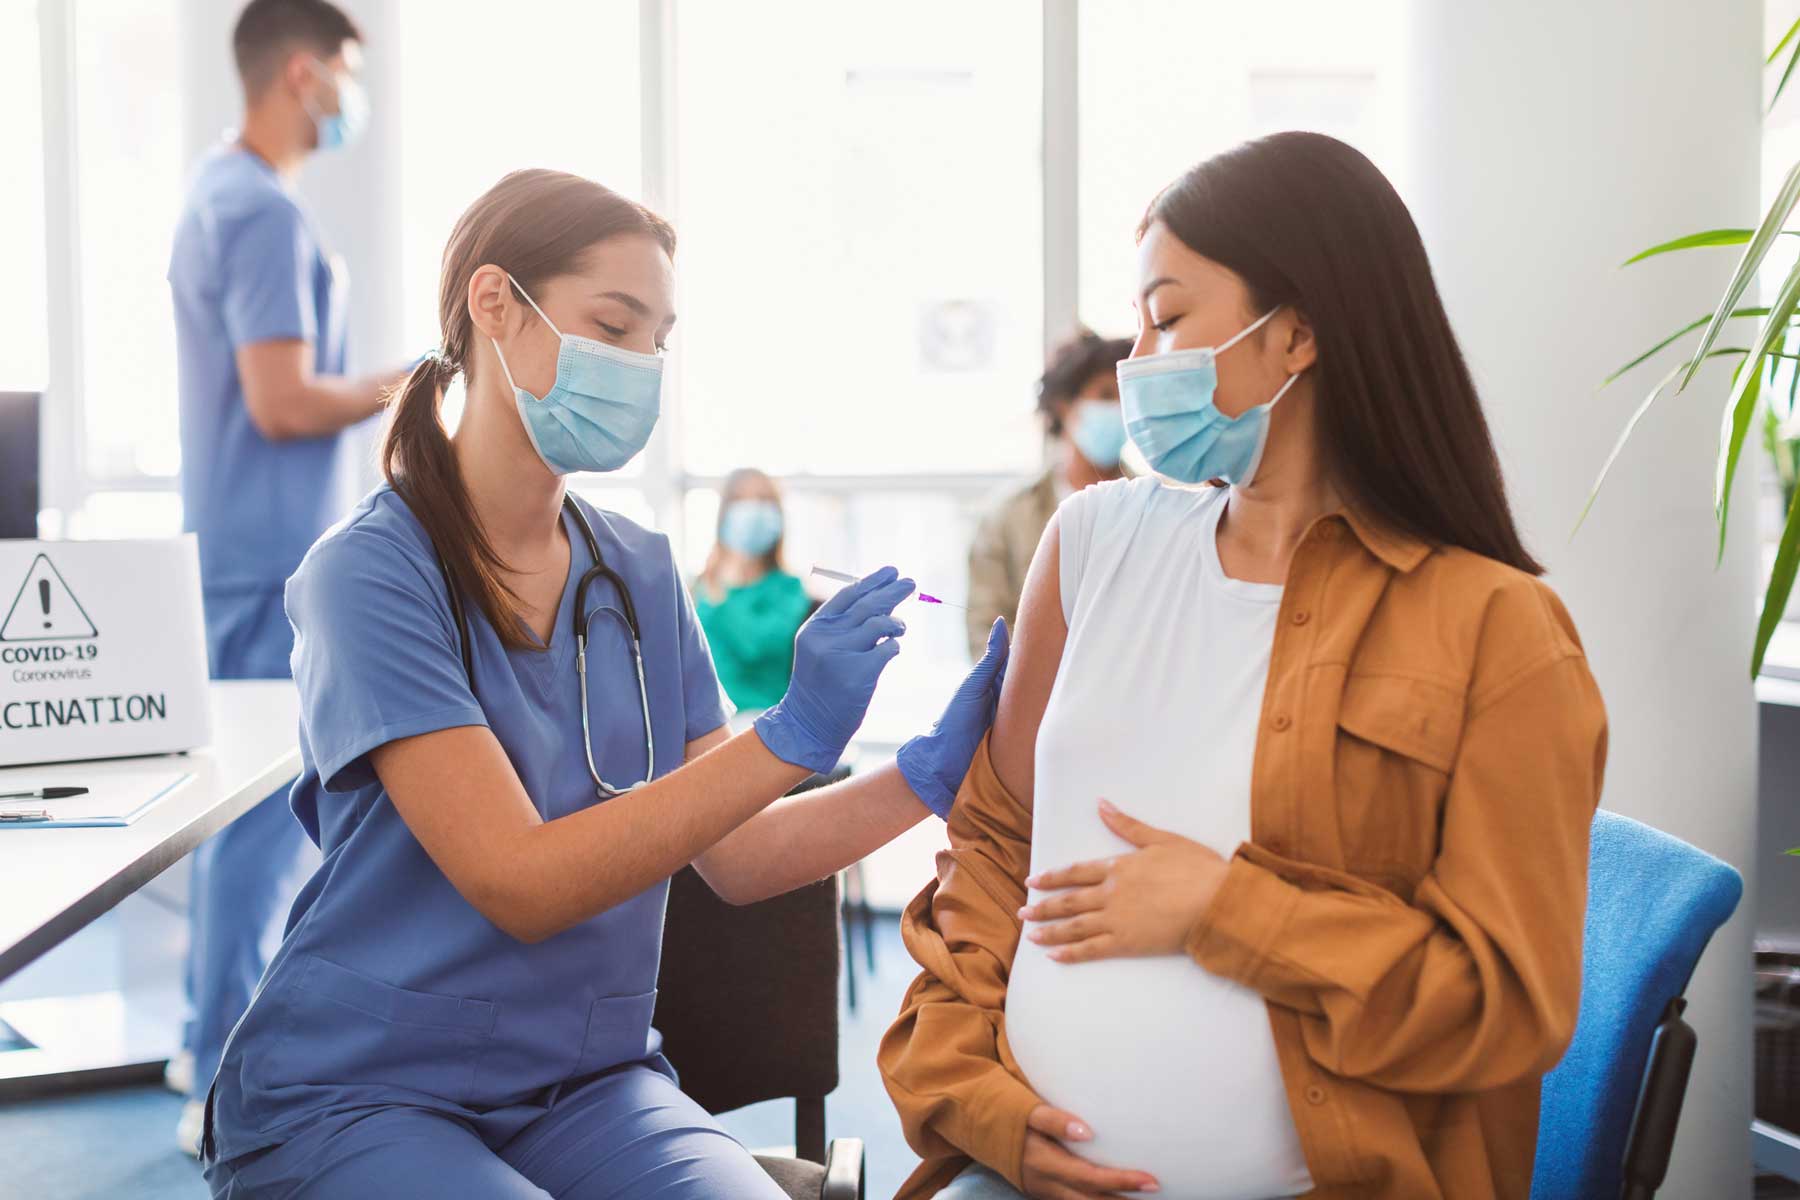 A pregnant woman wearing a surgical mask recieves a vaccine from a nurse.